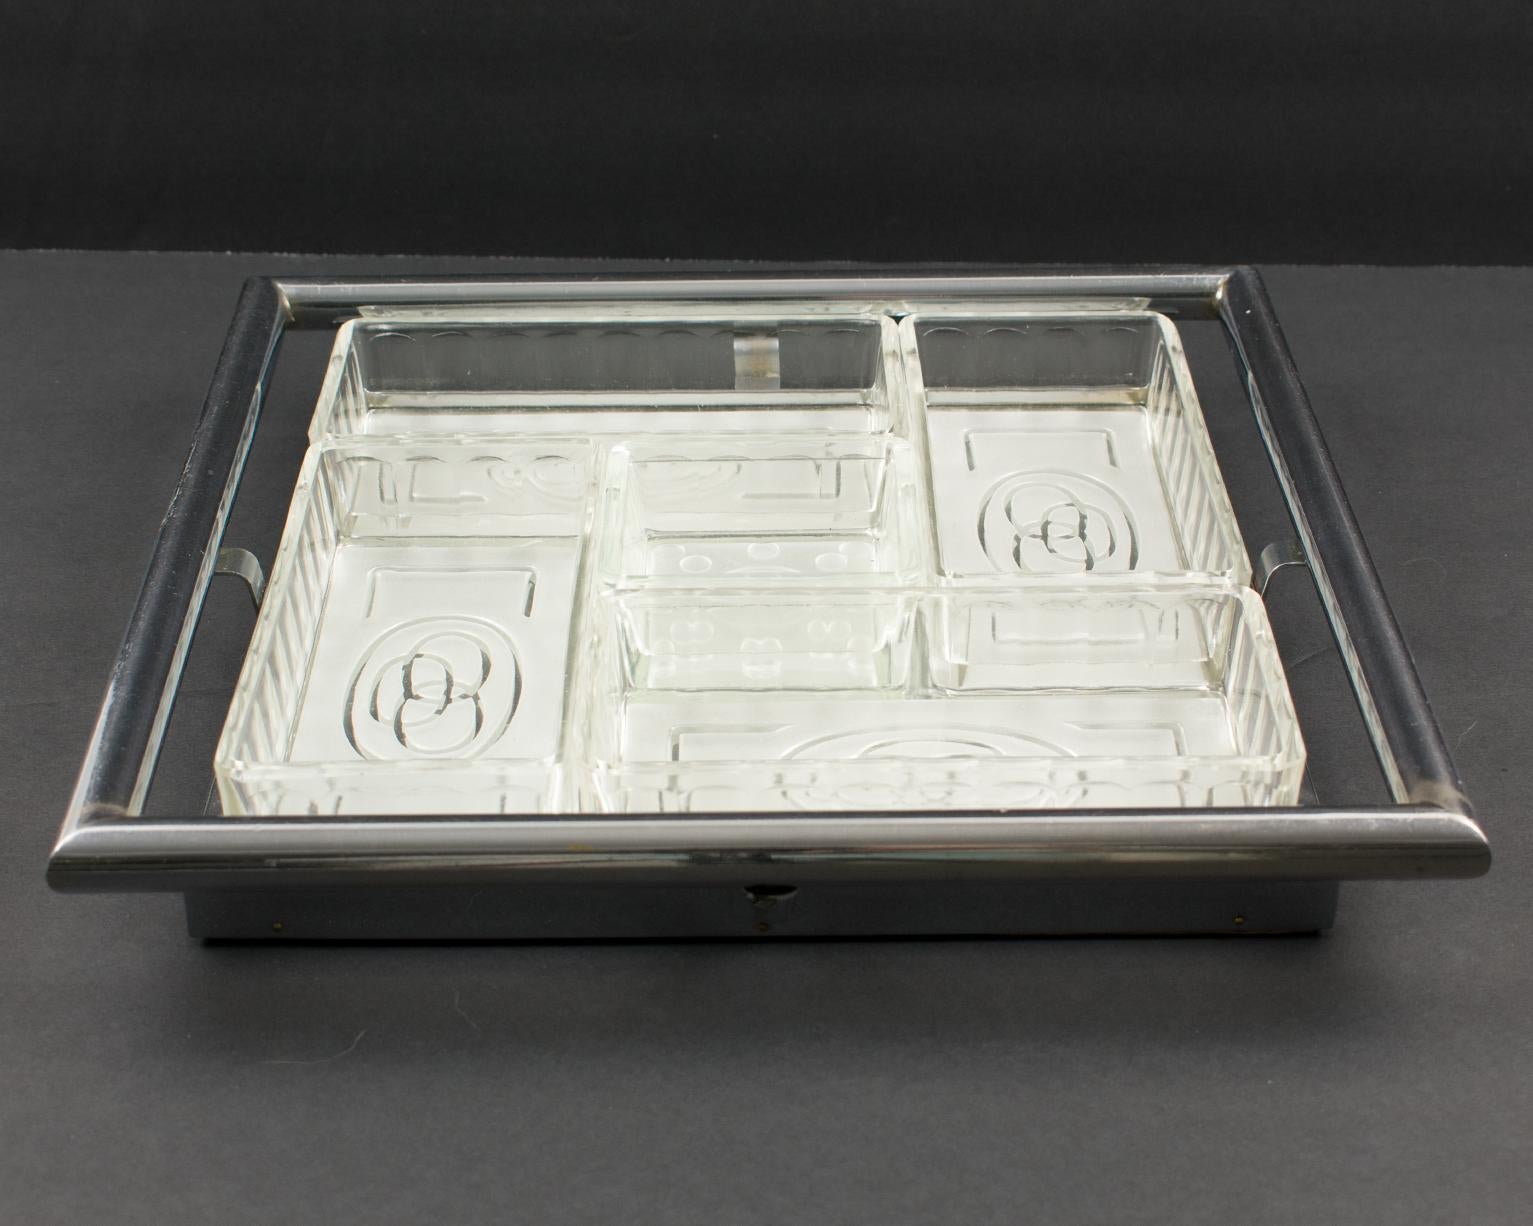 Mid-20th Century French Art Deco Cocktail Barware Set Chrome Tray with Glass Dishes